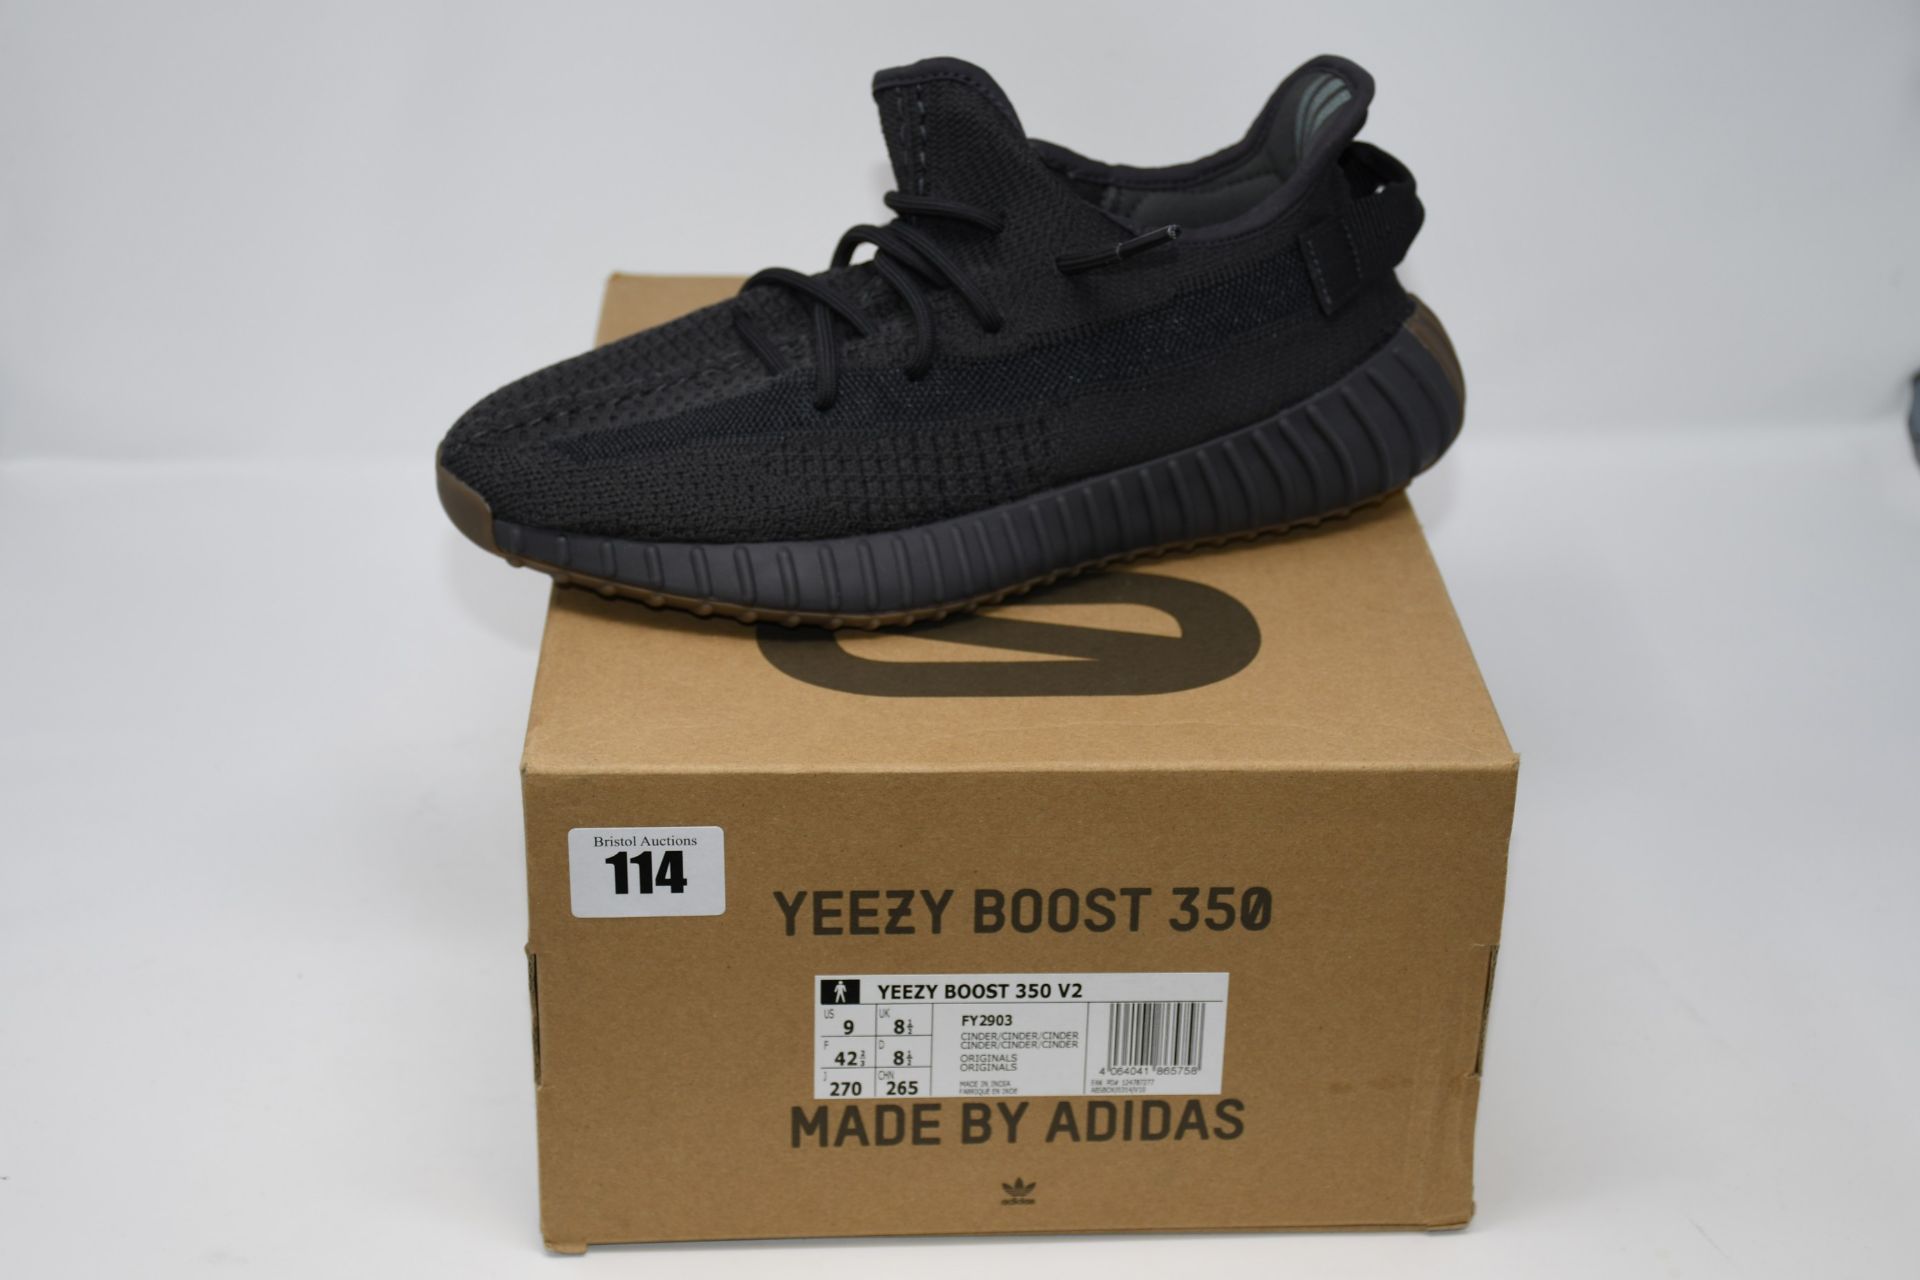 A pair of as new Adidas Yeezy boost 350 (UK 8.5).